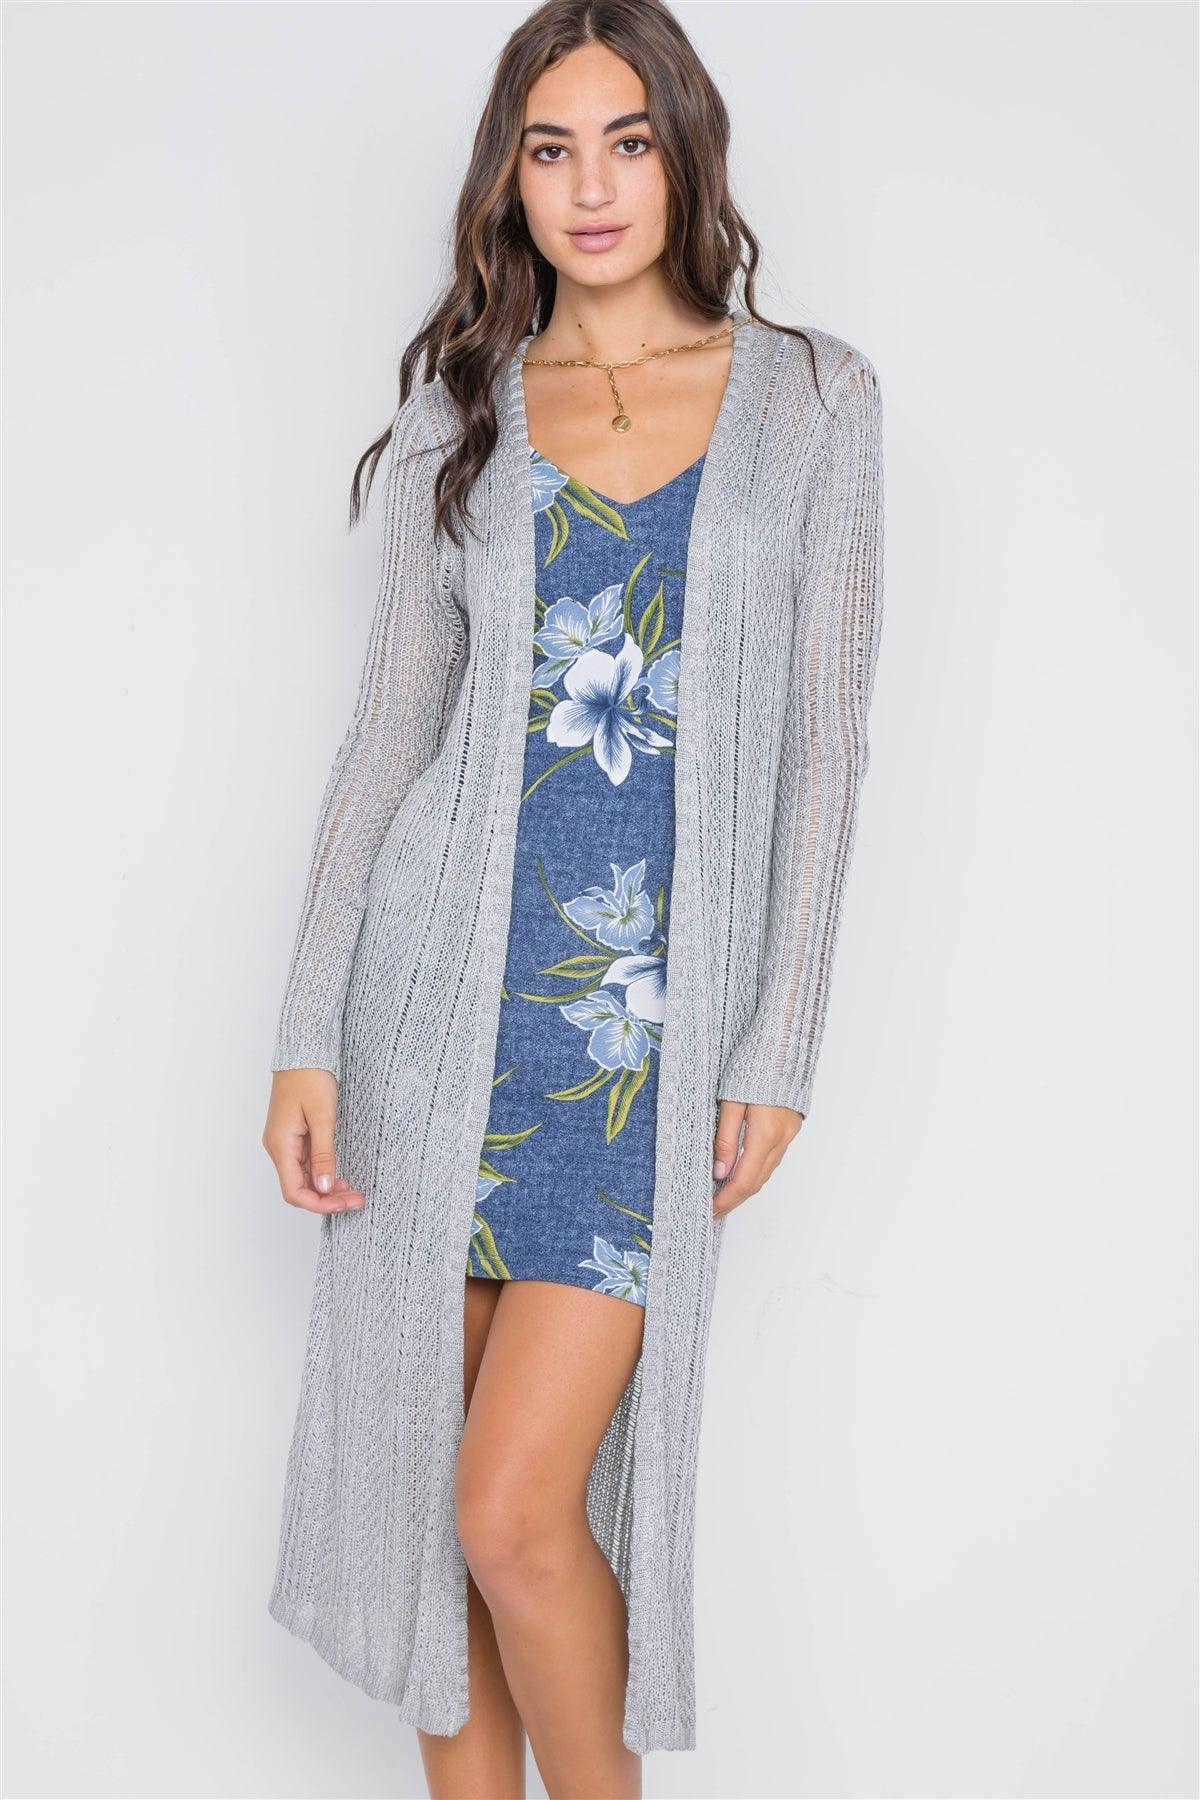 Heather Grey Knit Open Front Long Sleeve Cardigan /3-3